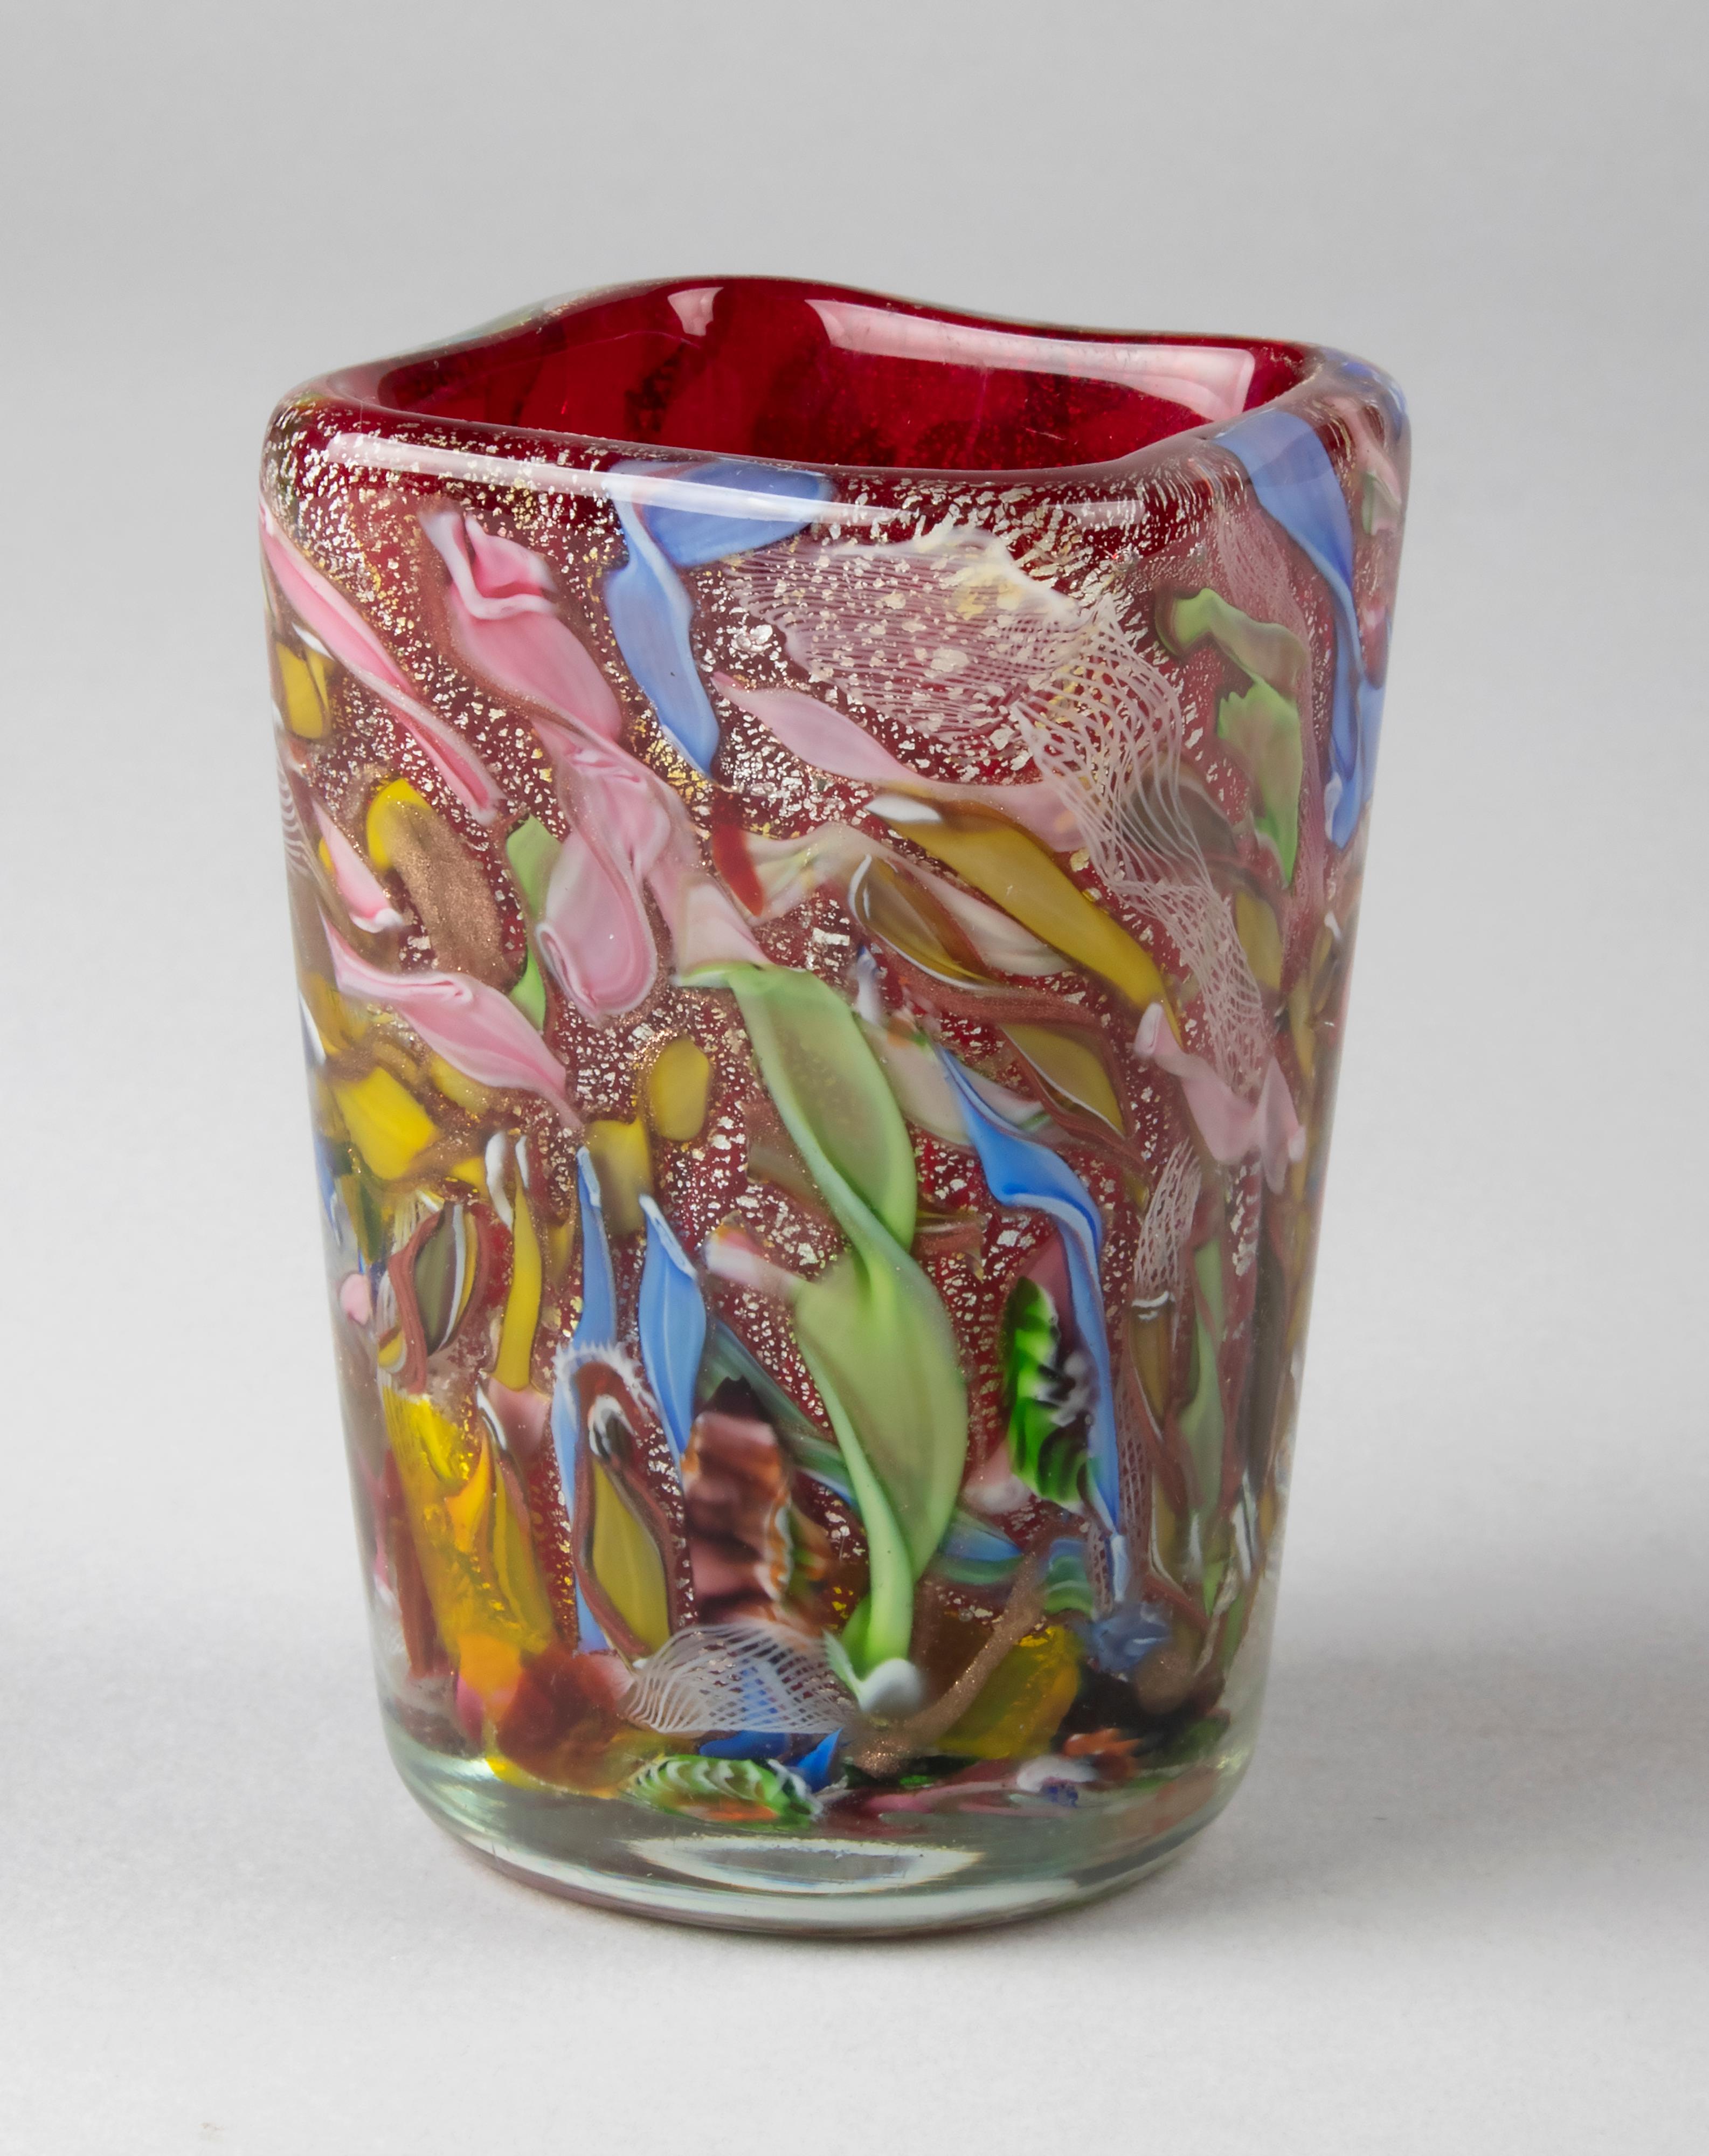 Mid 20th century Italian art glass vase attributed to Anzolo Fuga (1914-1998) Arte Vetreria Muranese A VE M. It is a squared tapering vase in the tutti frutti decor with multi colored fused glass pieces and silver flecks. Not signed, in good